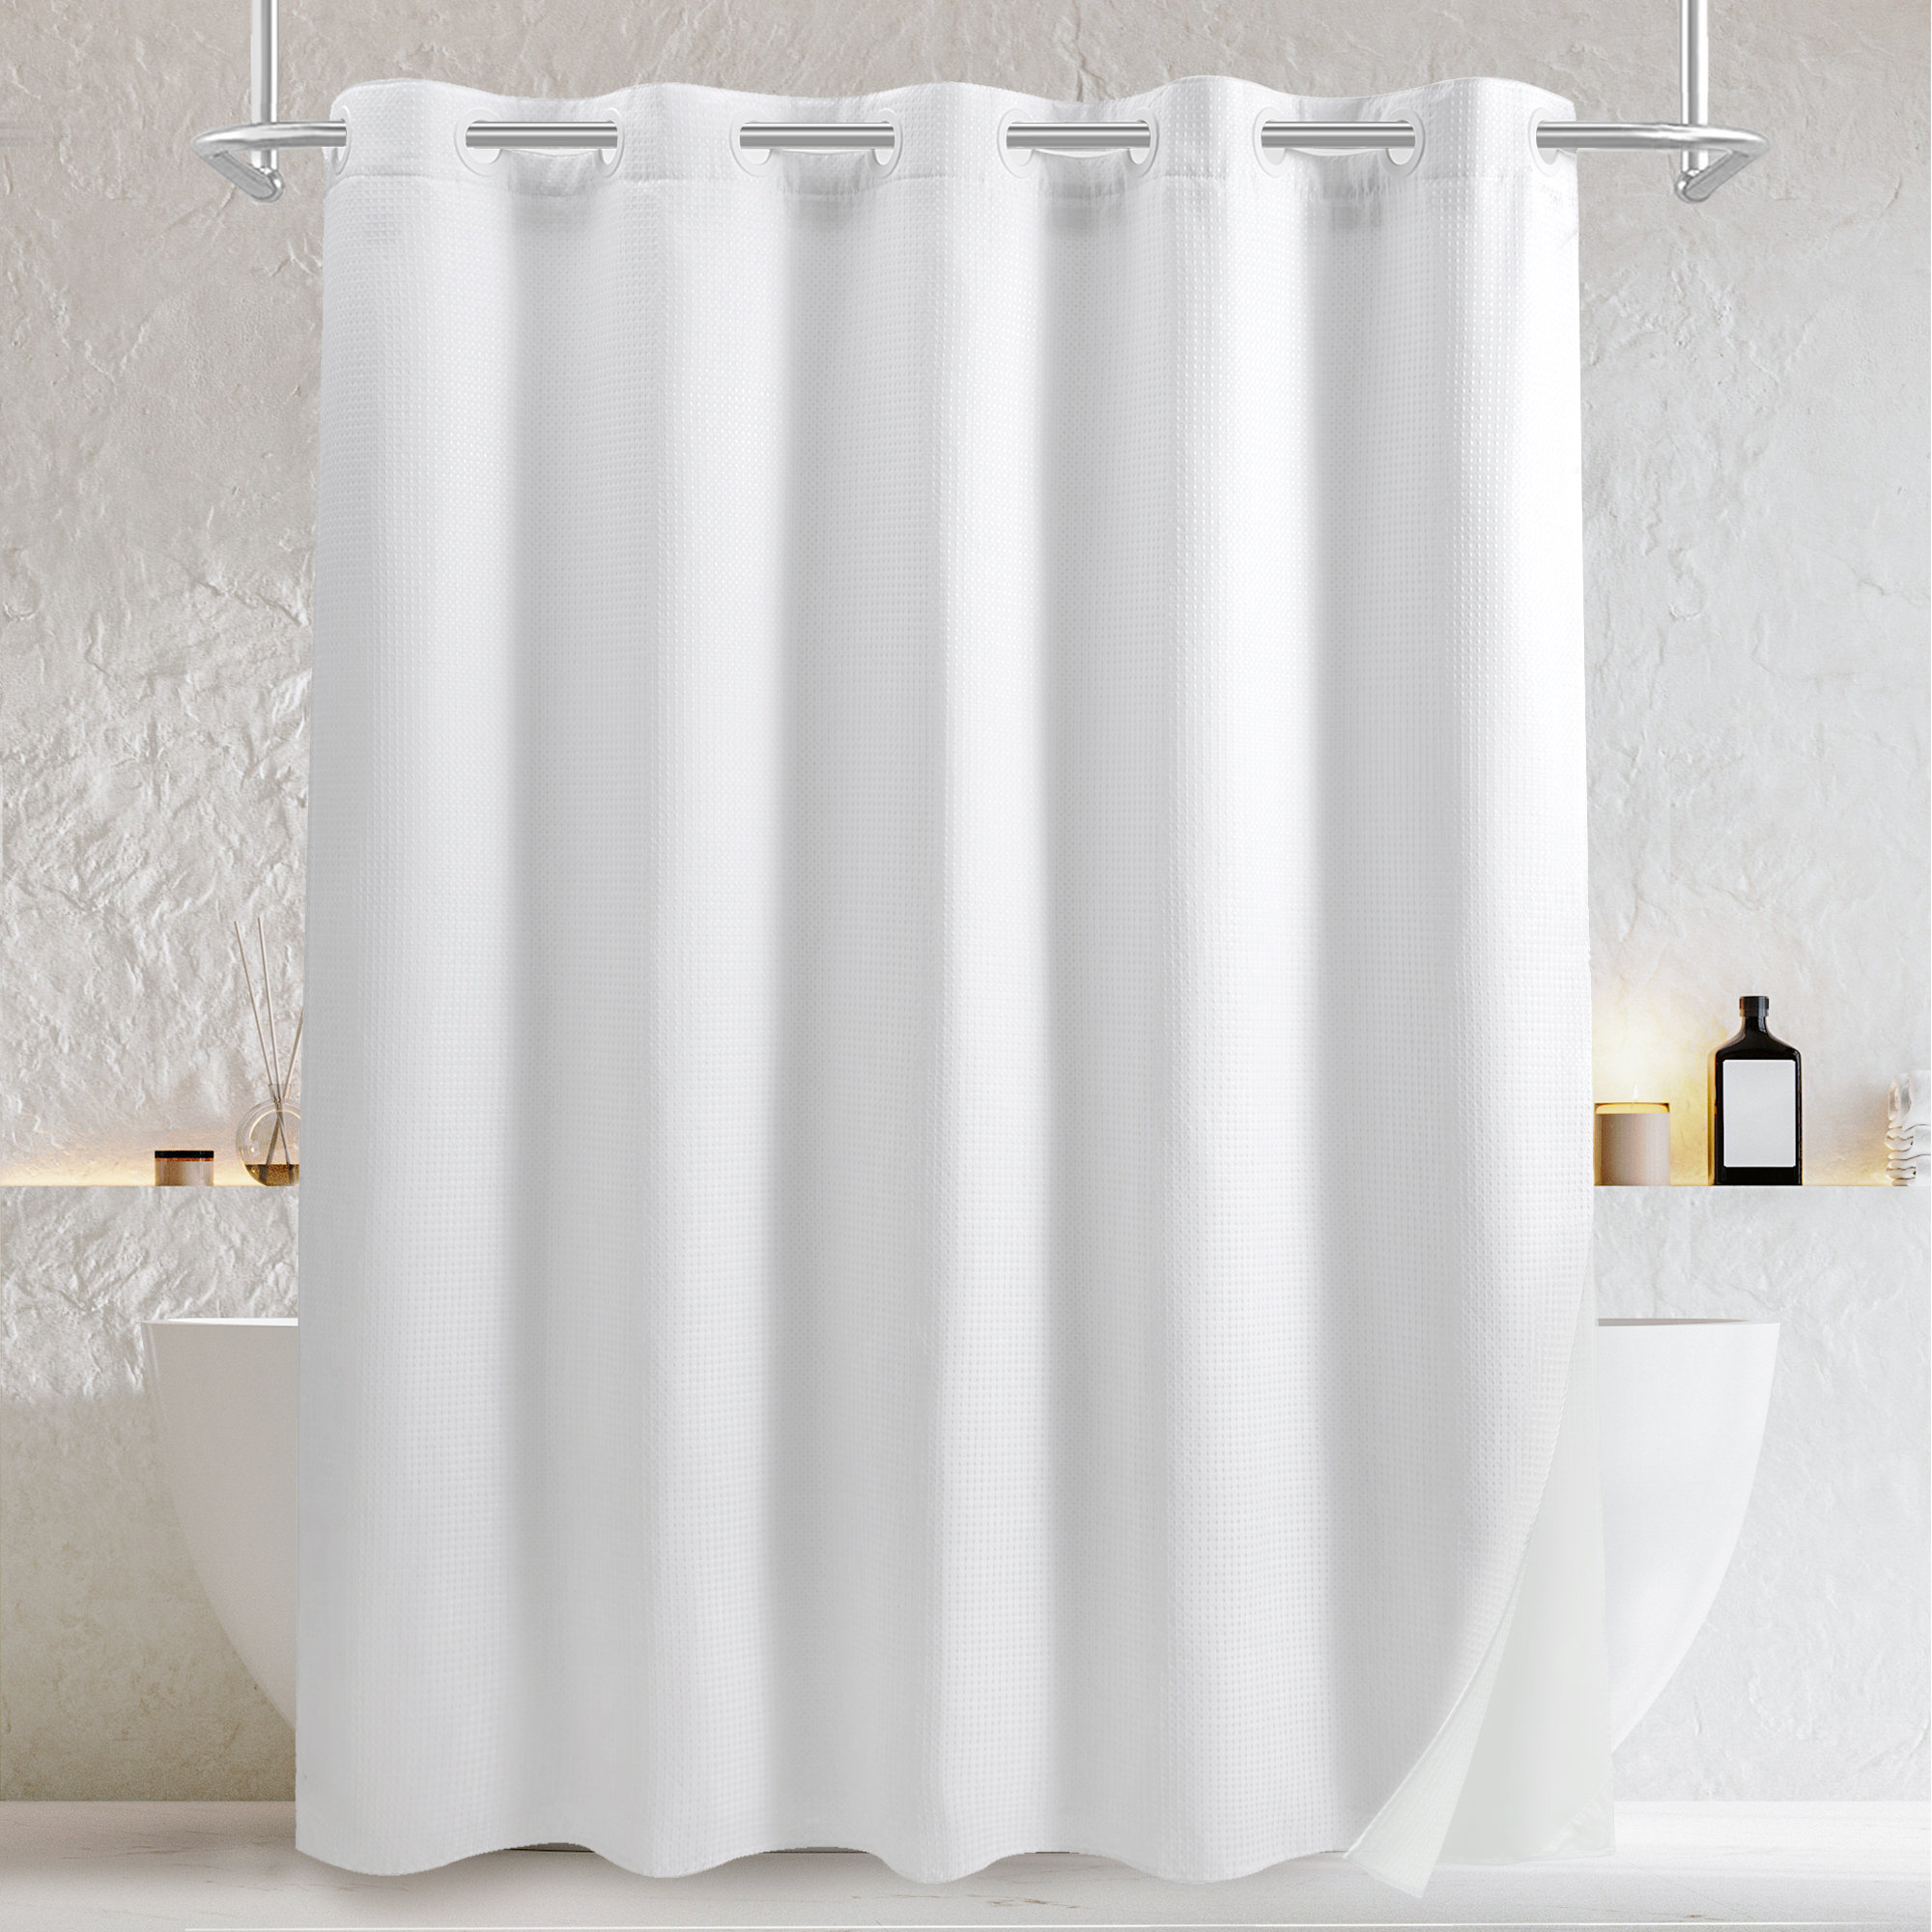 Shower Curtain with Snap-in Liner, Heavy Duty Waterproof Metal